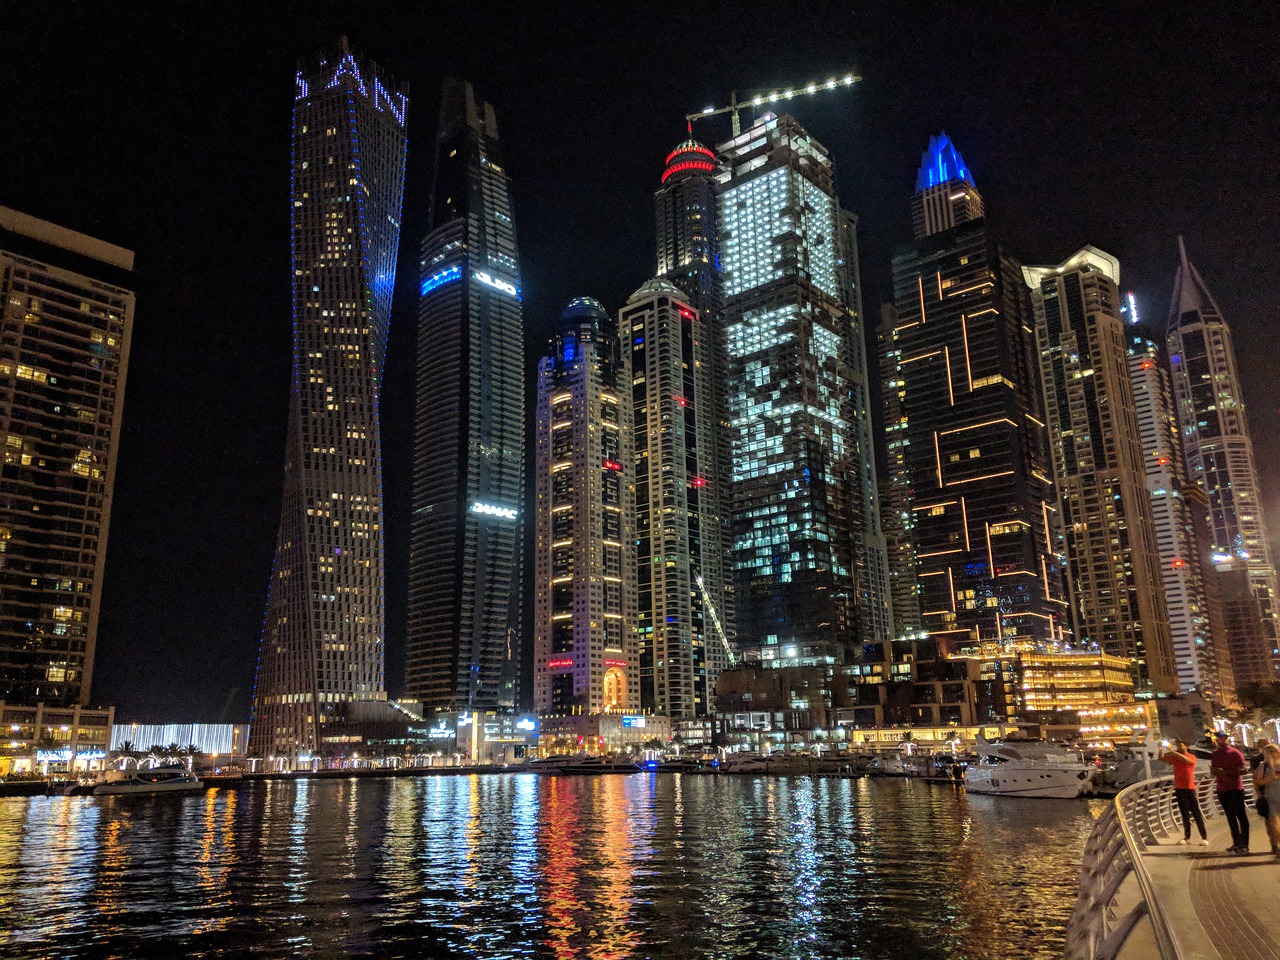 a group of people standing on a dock next to a body of water, hurufiyya, night life buildings, with tall glass skyscrapers, view from the sea, luxury lifestyle